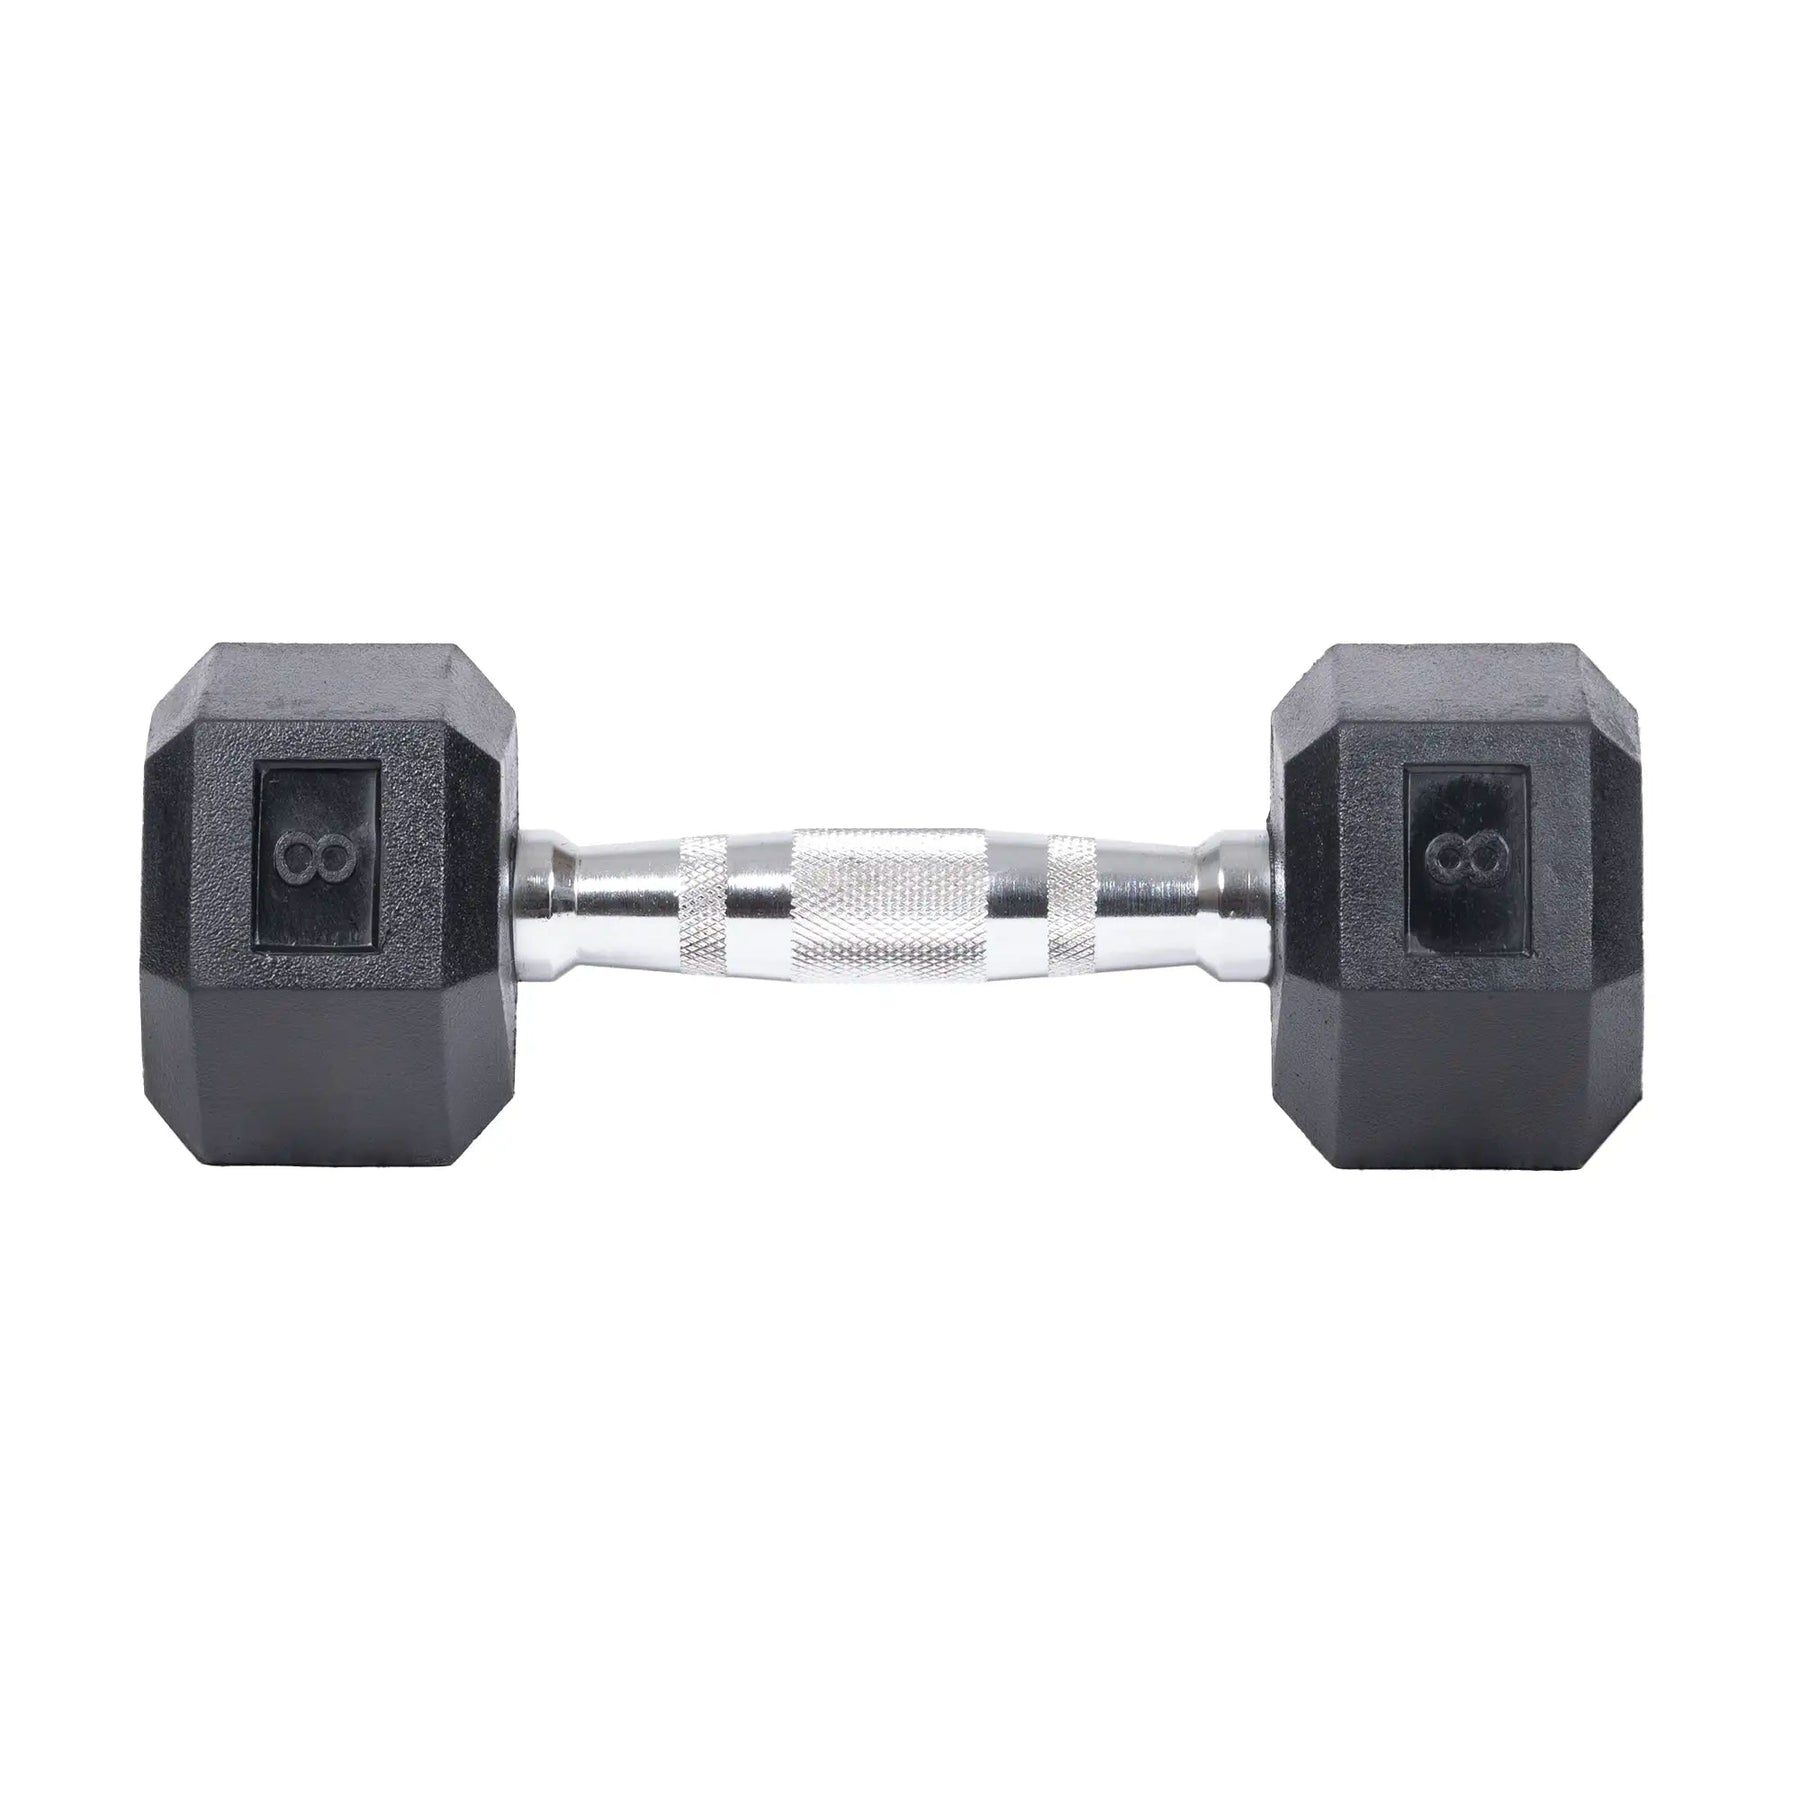 Dumbbells Hand Weights Set of 2 - Rubber Hex Chrome Handle Exercise &  Fitness Dumbbell for Home Gym Equipment Workouts Strength Training Free  Weights